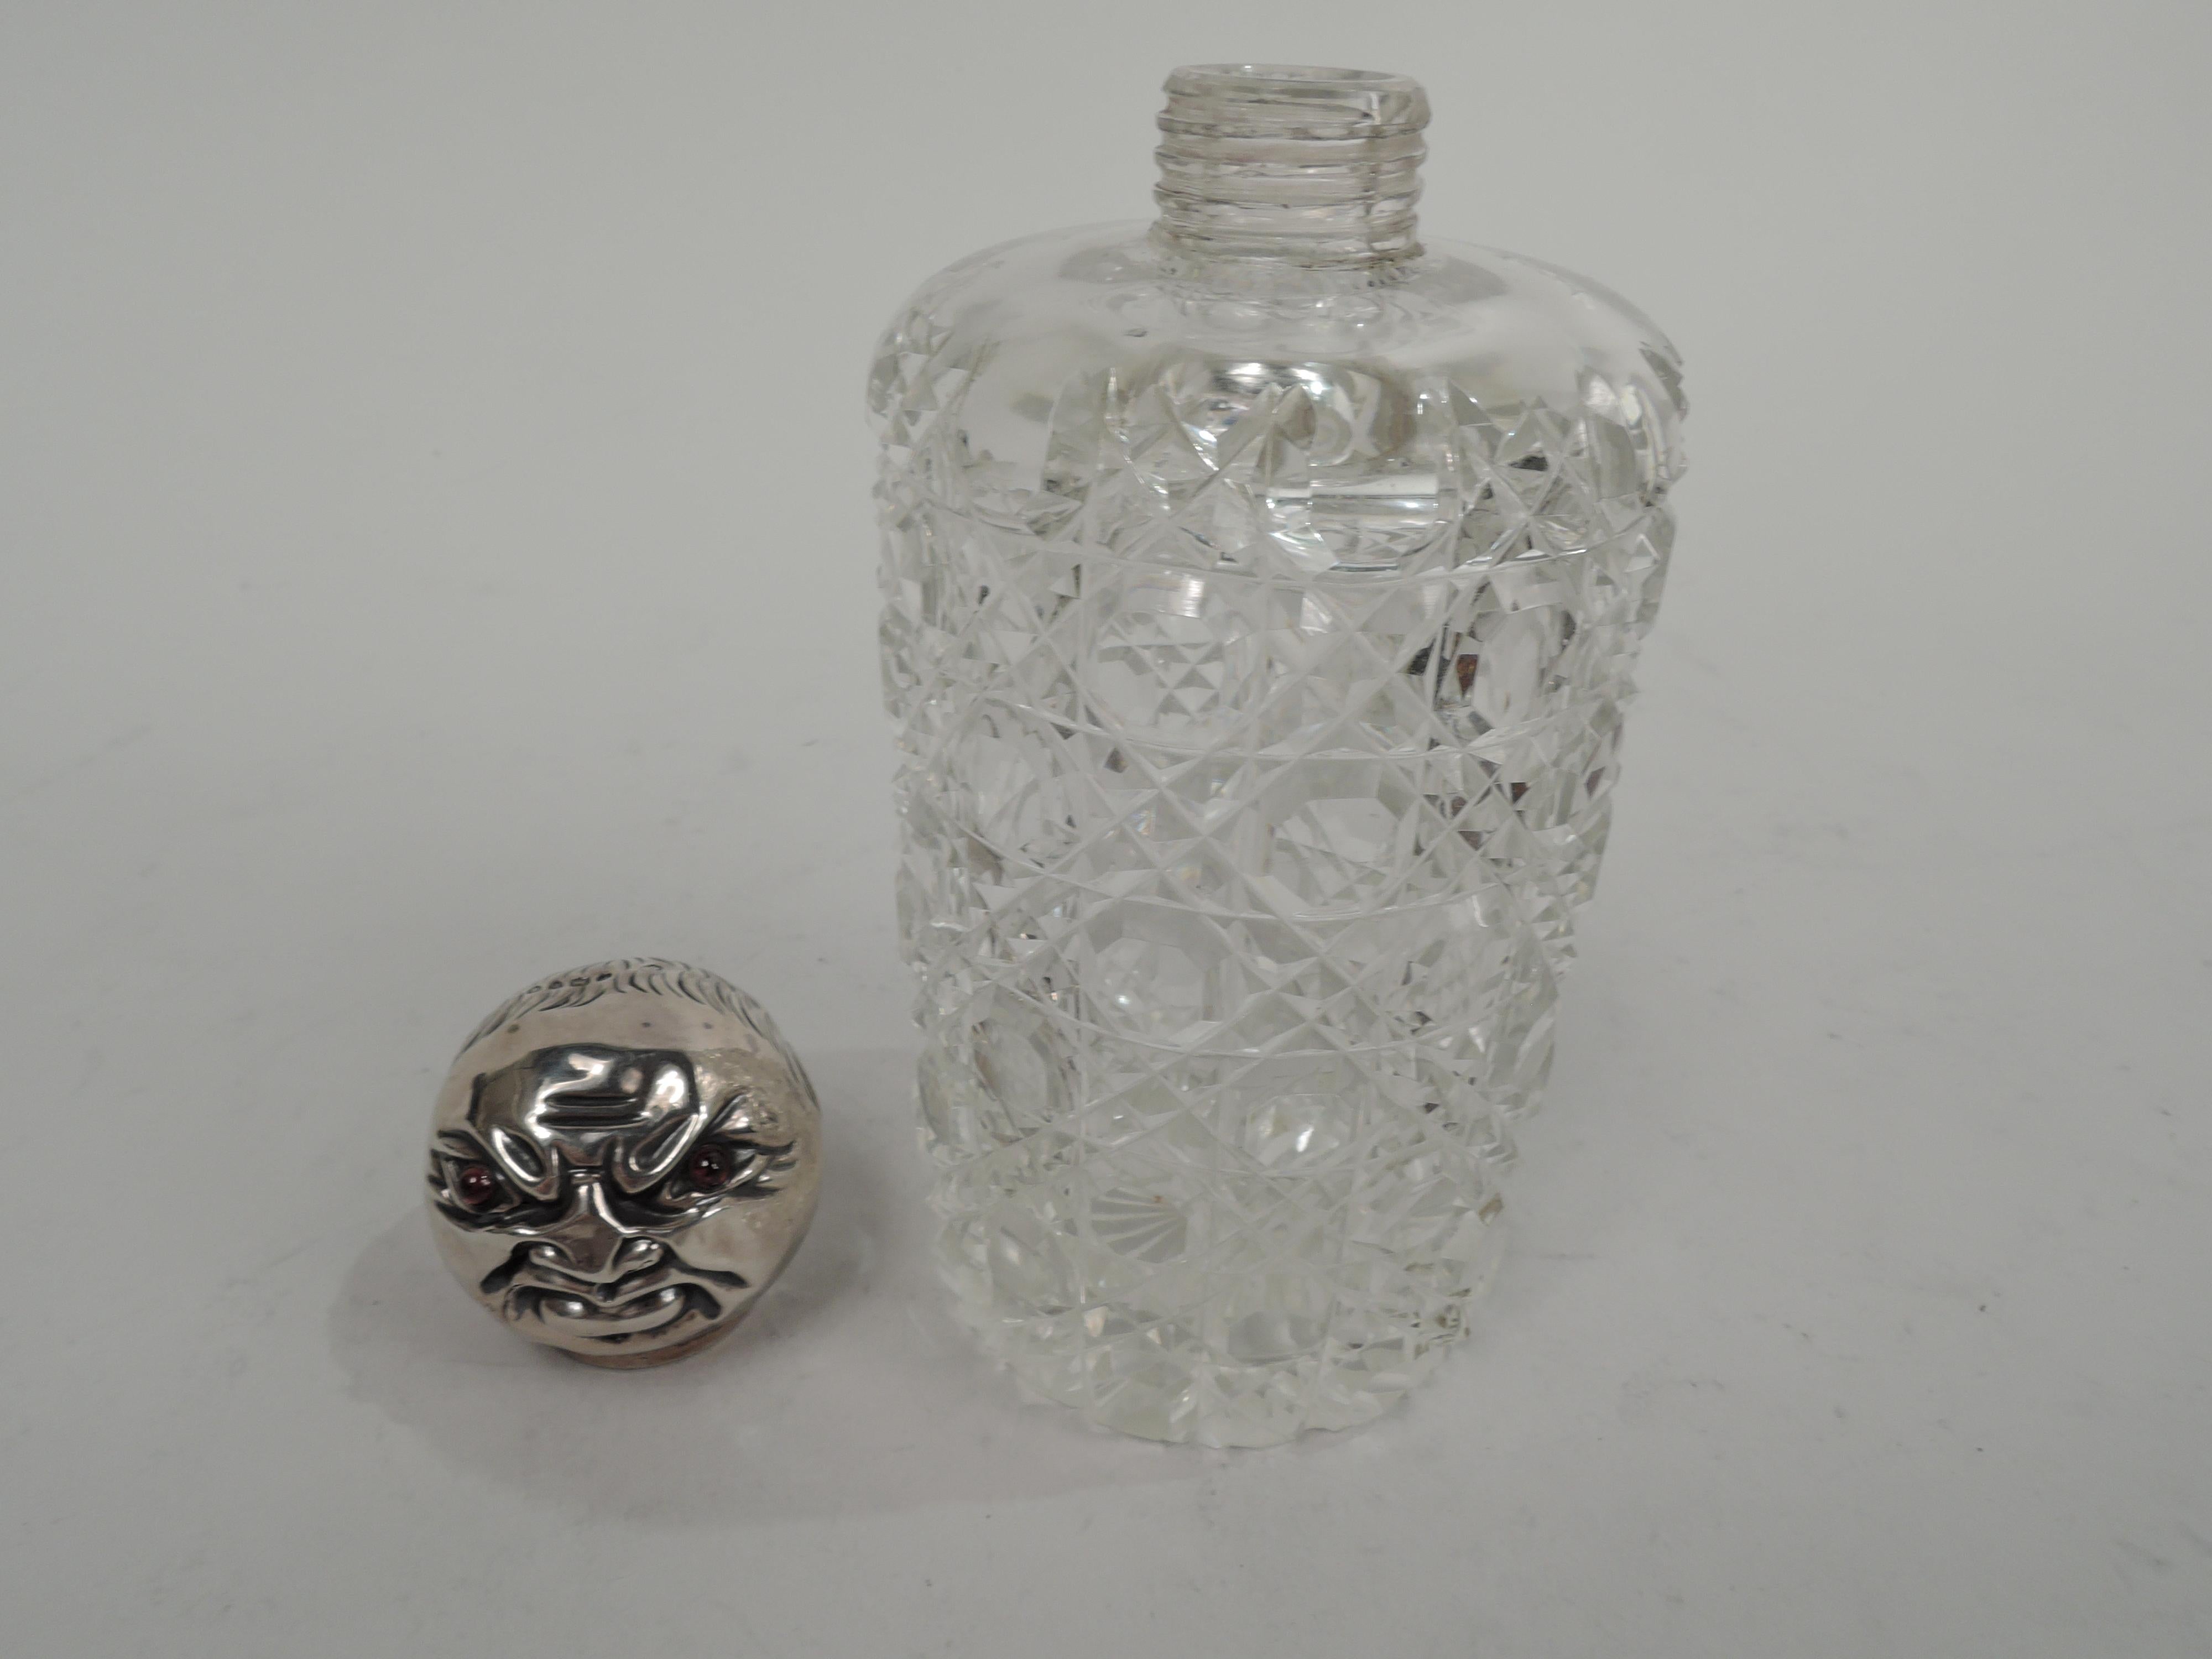 English Victorian cologne bottle, 1880. Cut-glass cylinder with short and threaded inset neck. Ball cover in form of male head with big ears, receding hairline, tronie-style grimace, and red bead eyes. Fully marked including London assay stamp and